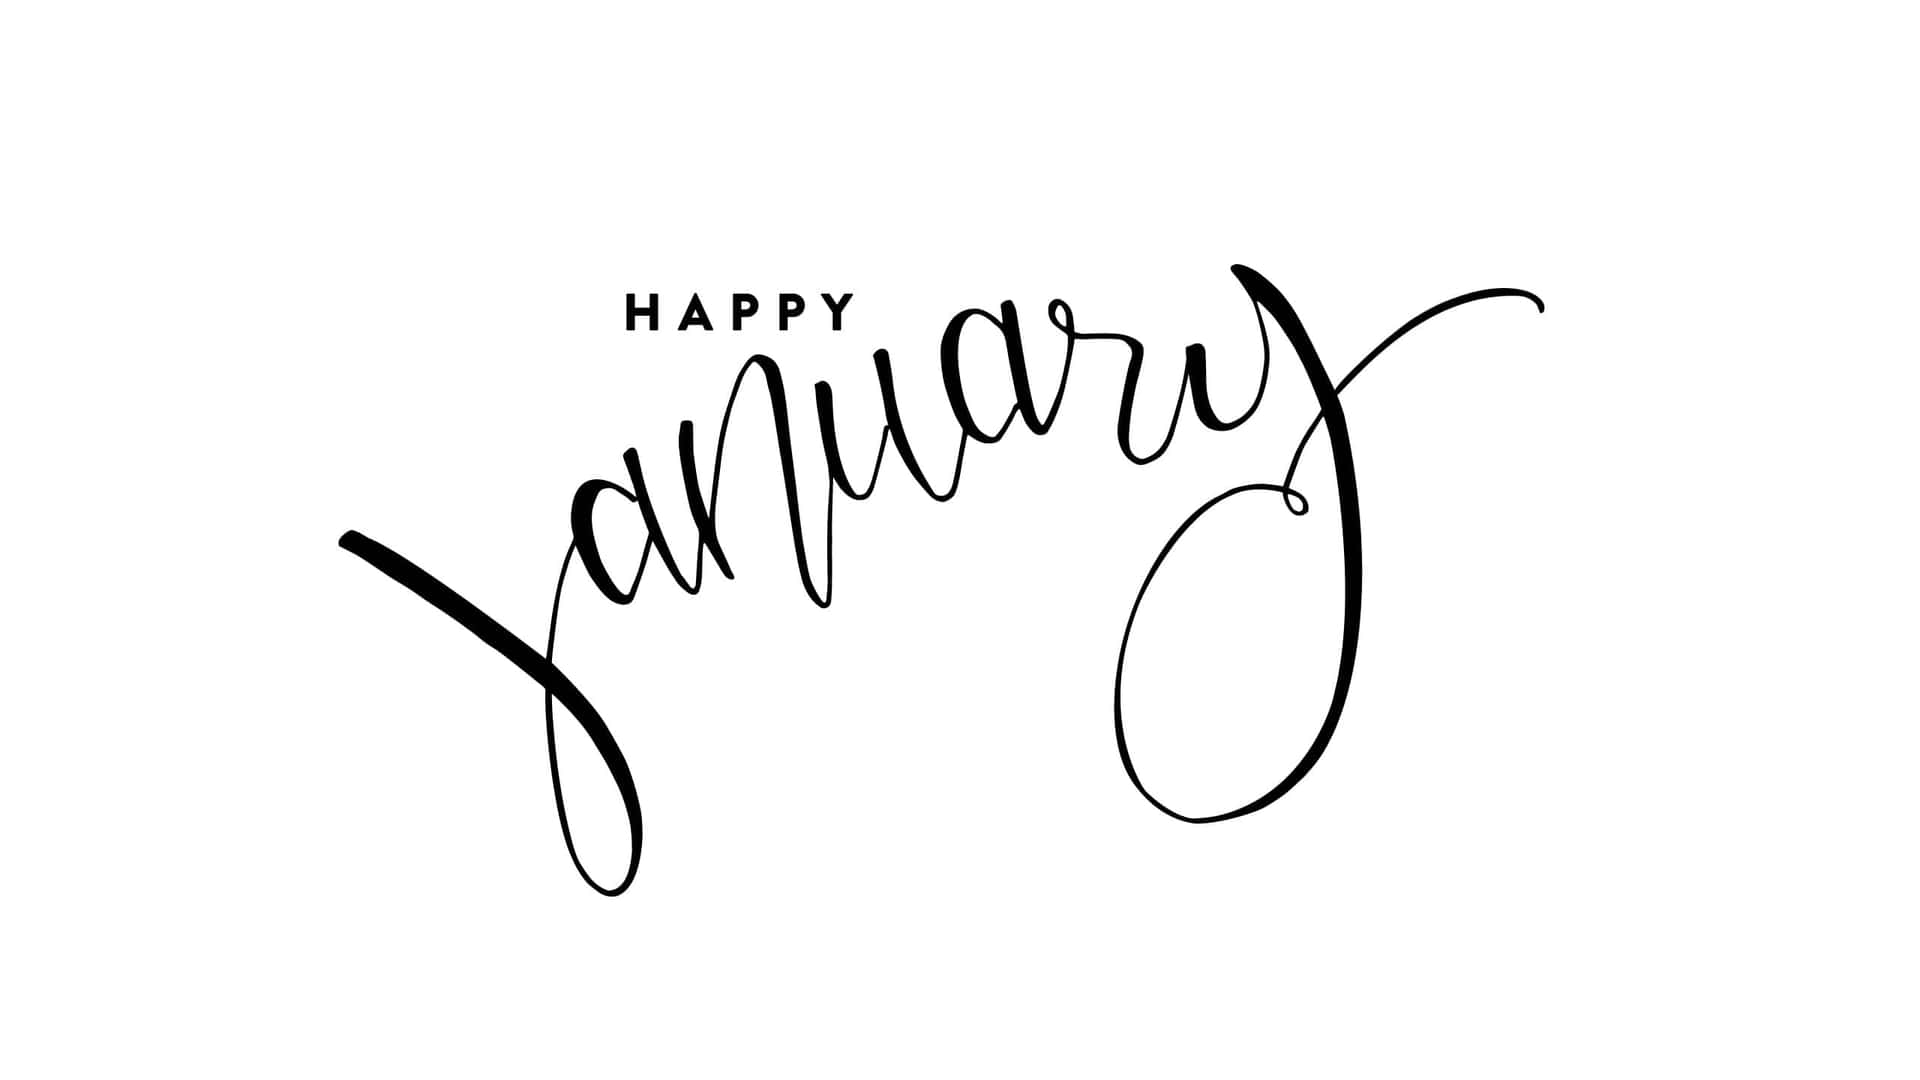 Start 2021 off right: Celebrate the arrival of January with a cute photo! Wallpaper